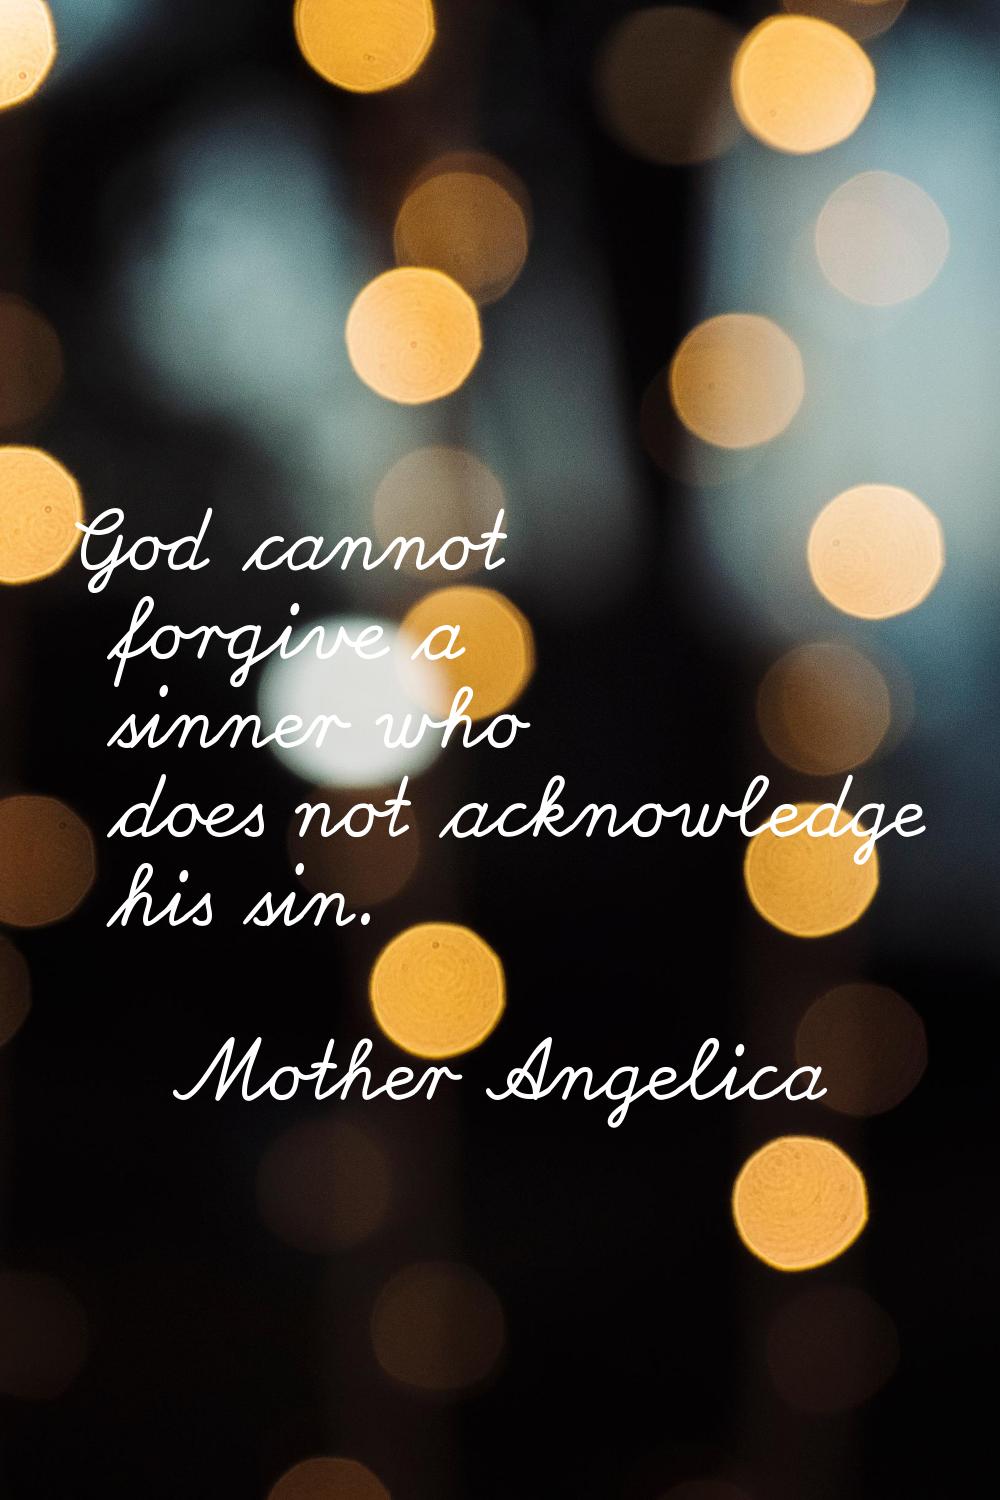 God cannot forgive a sinner who does not acknowledge his sin.